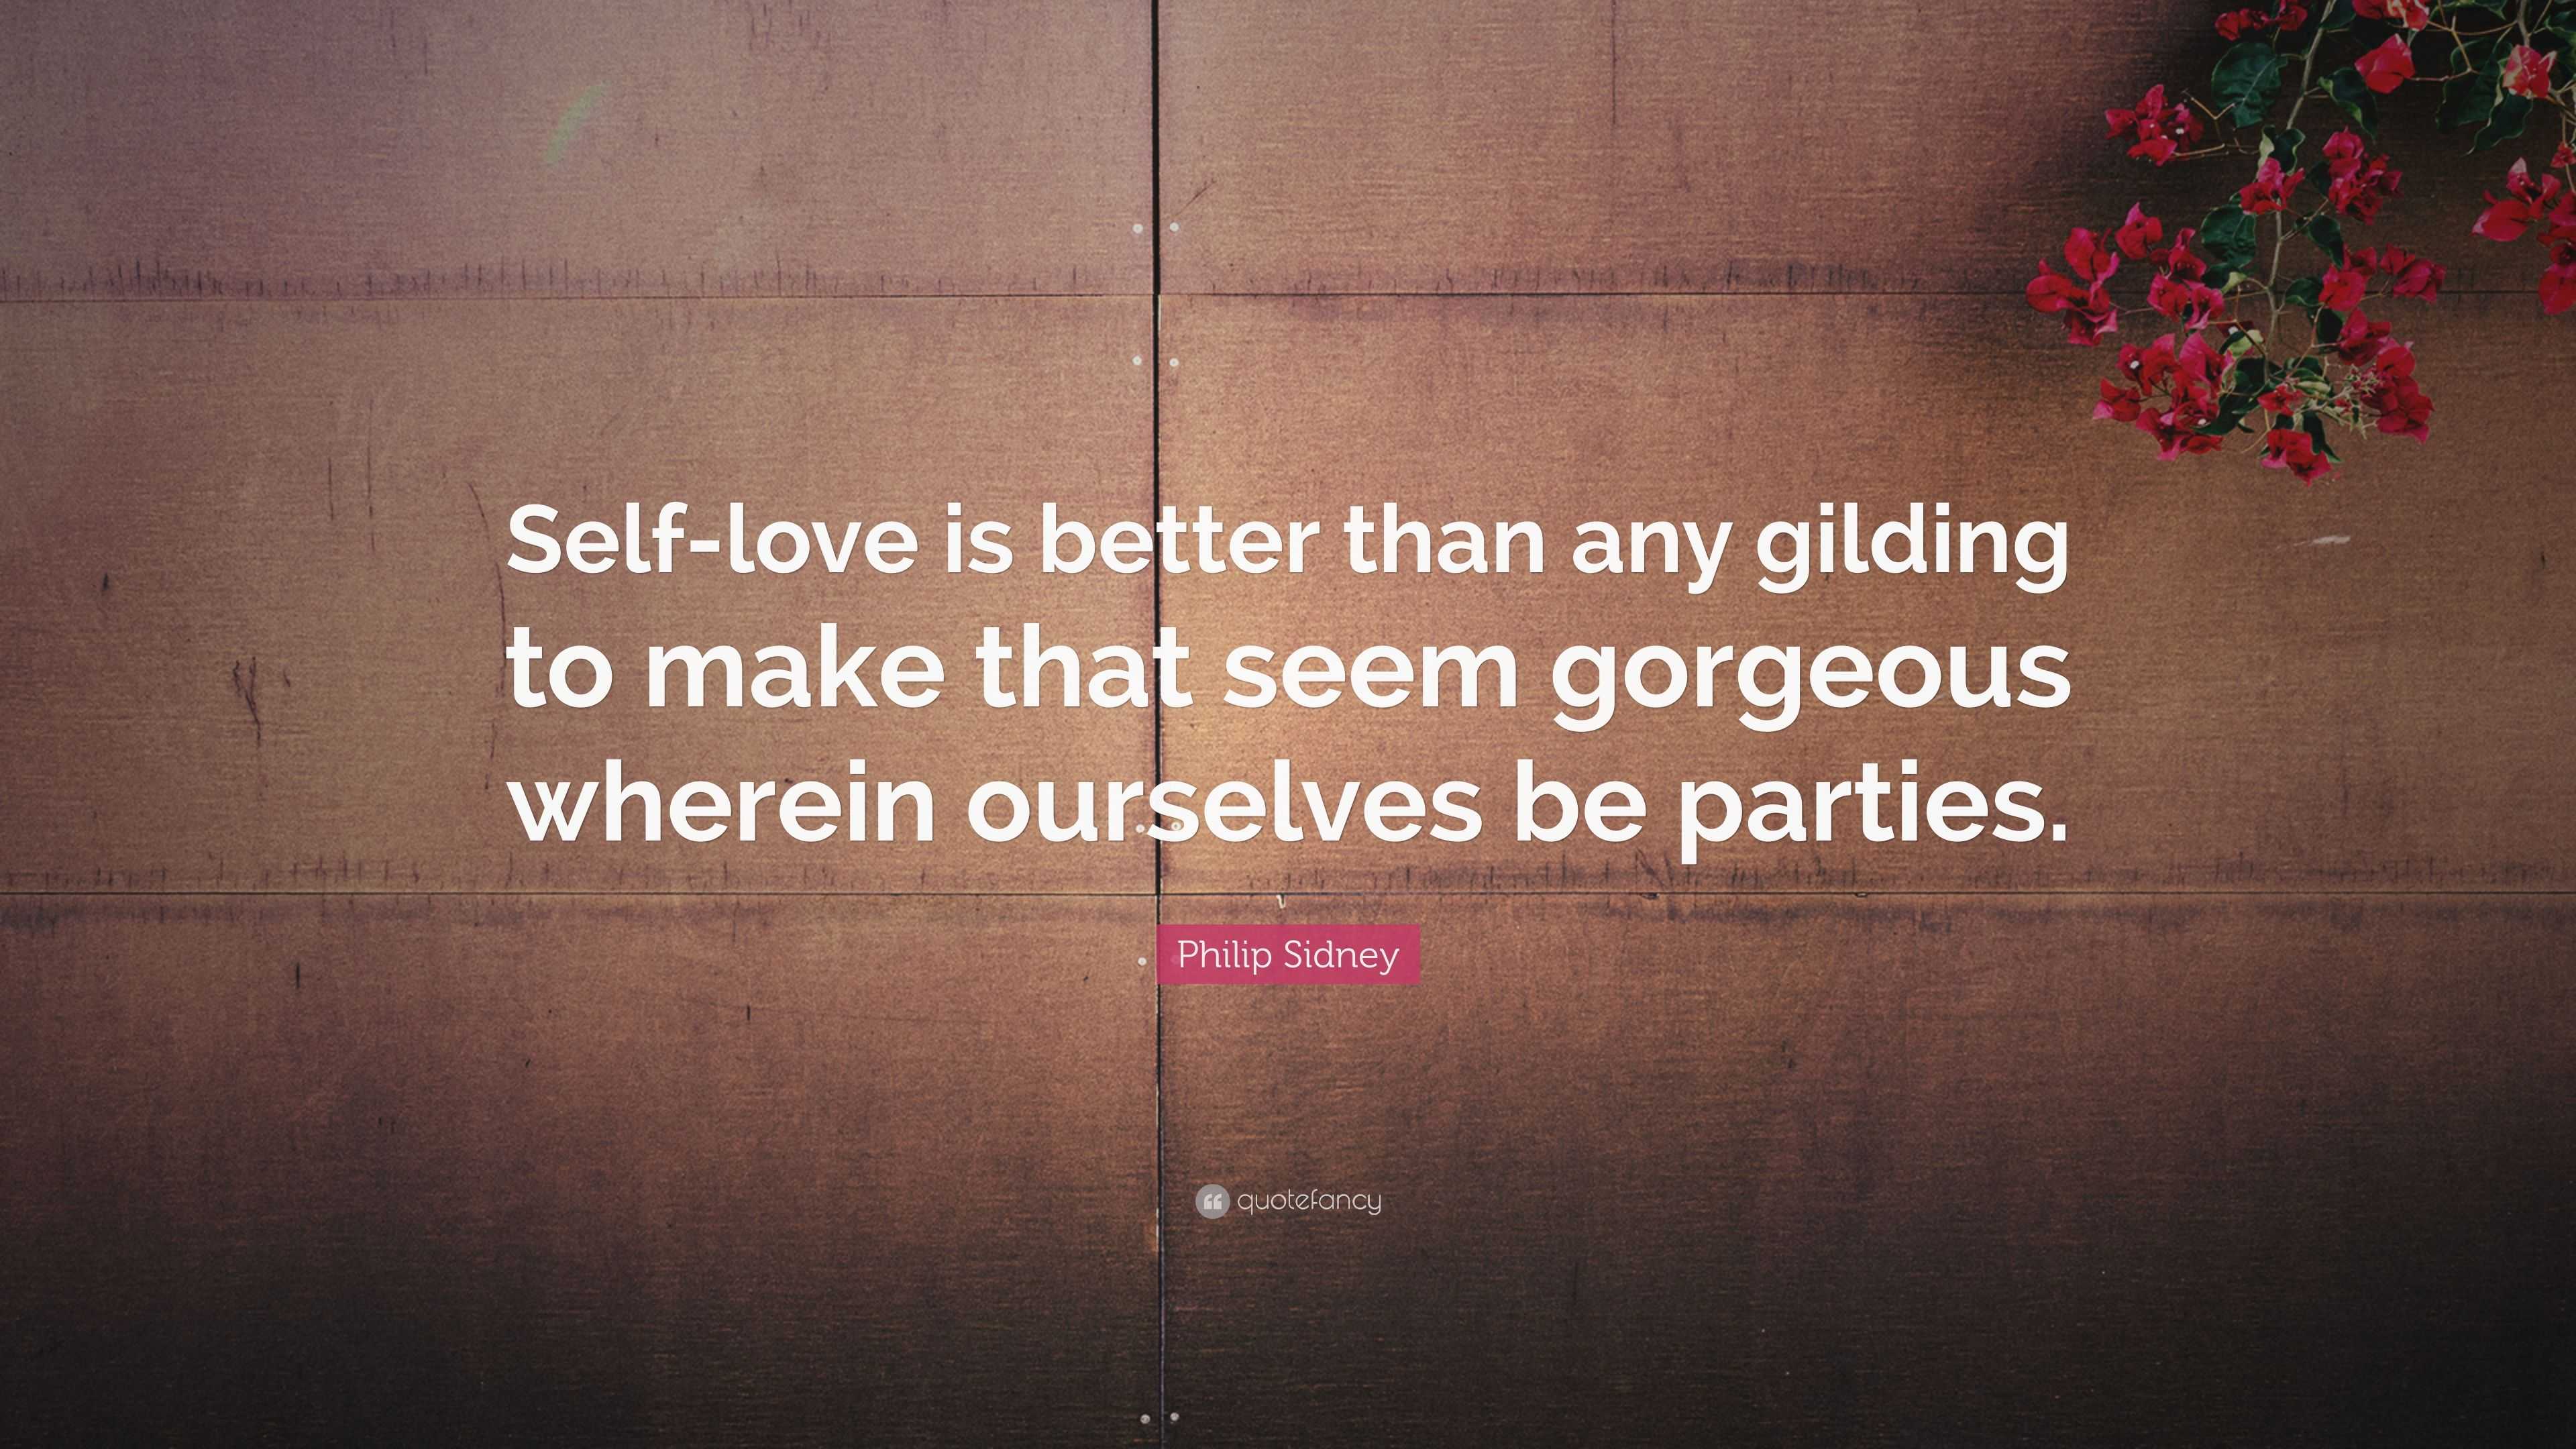 Philip Sidney Quote: “Self-love is better than any gilding to make that ...